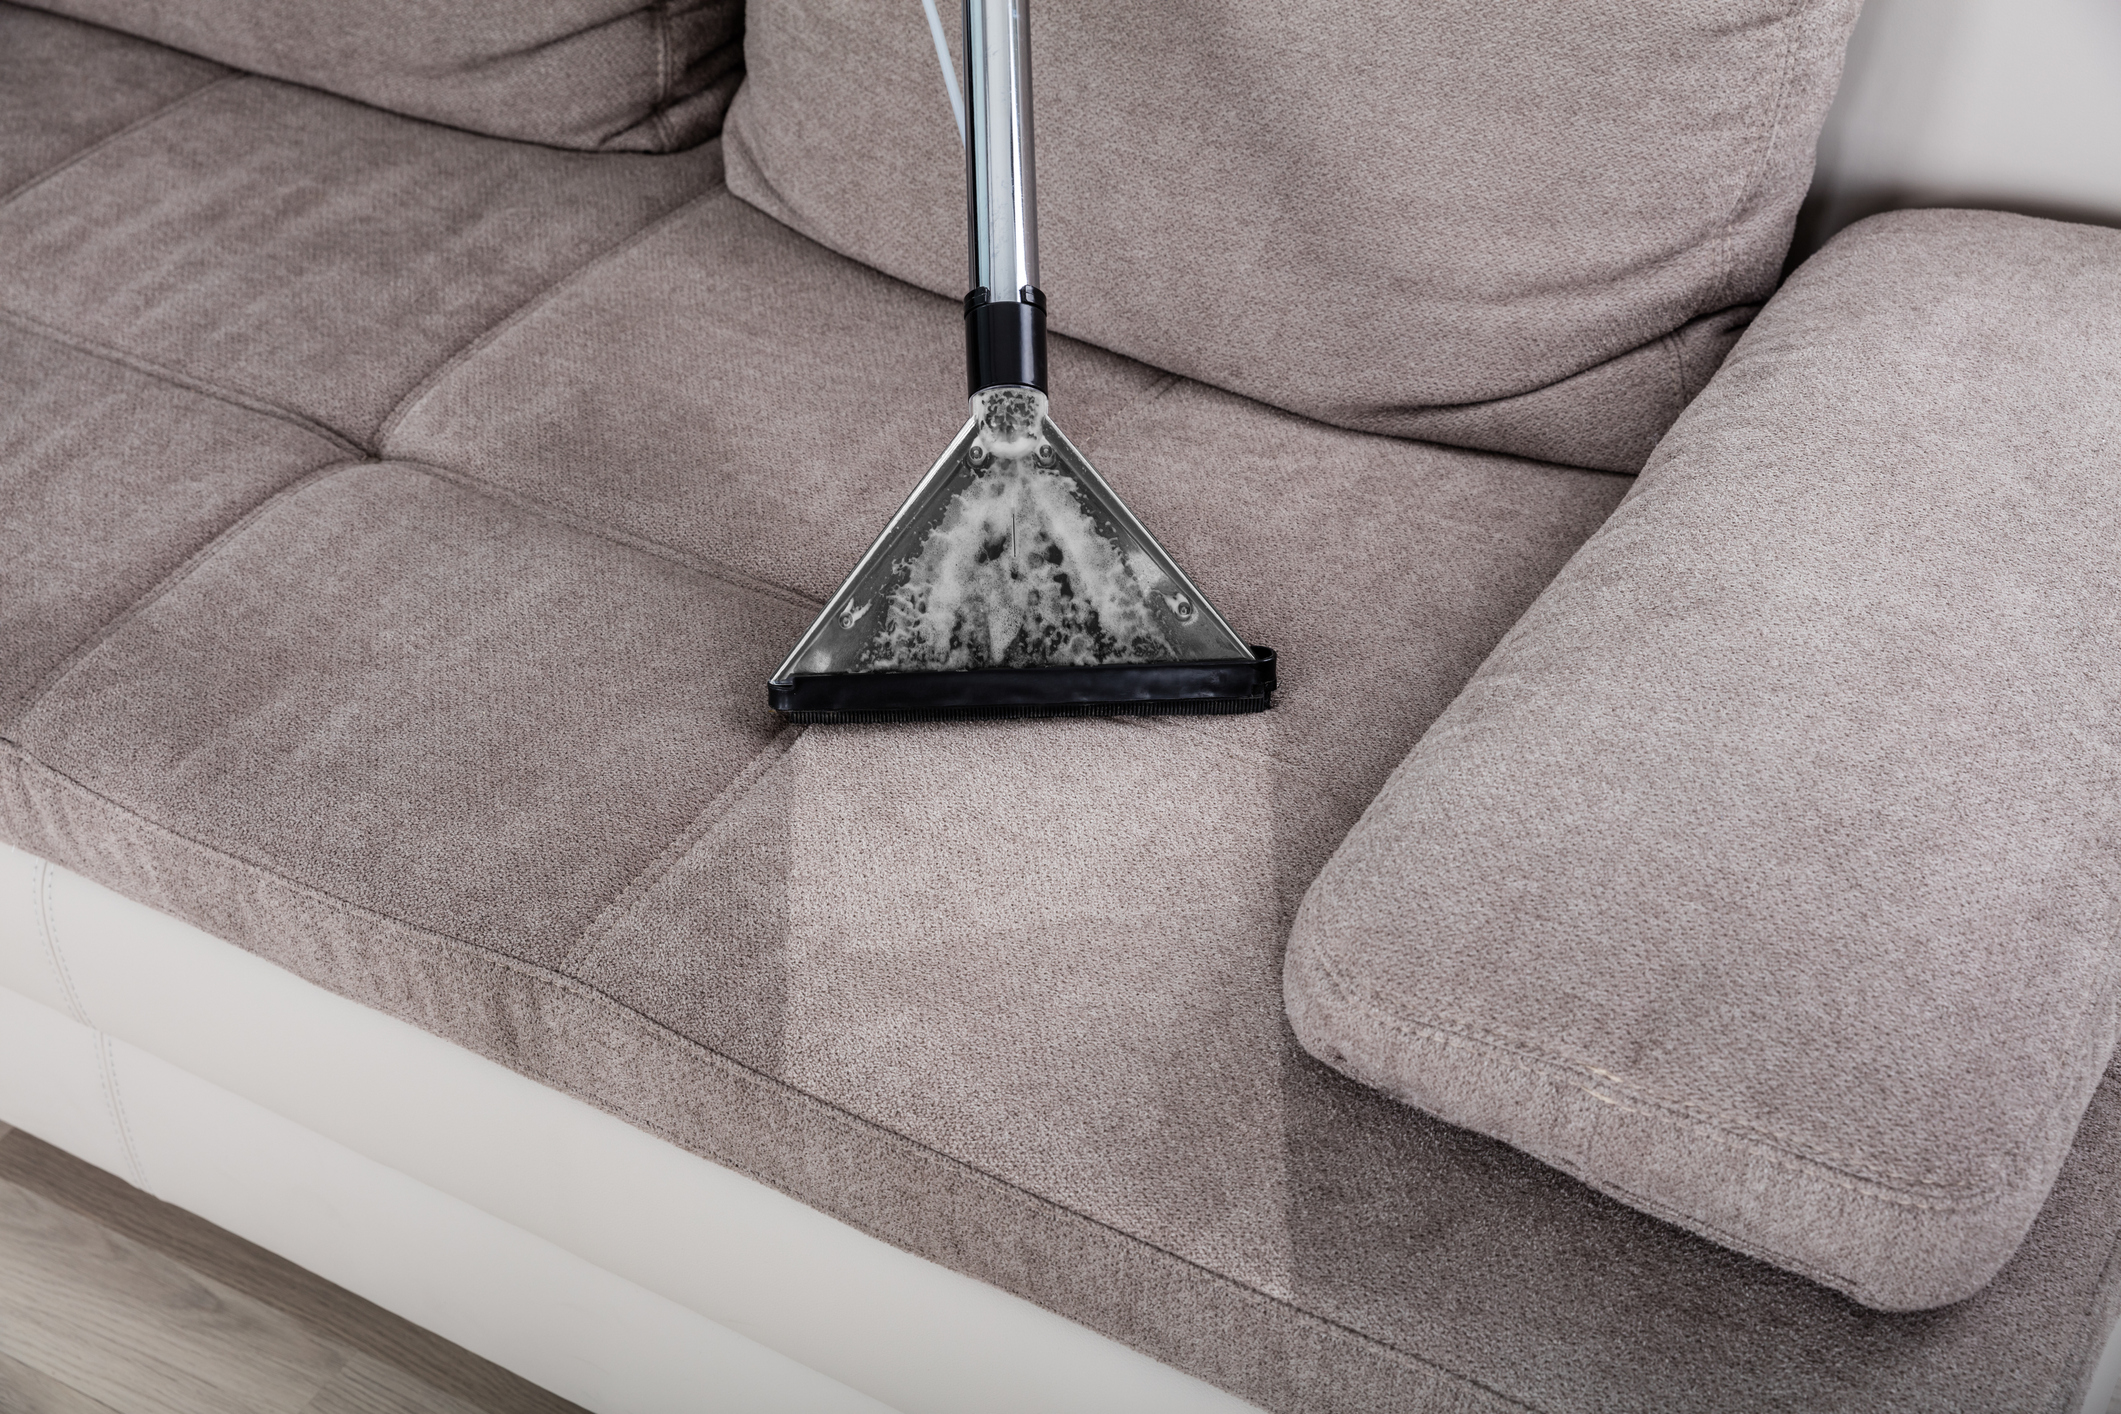 South Jersey Upholstery Cleaning